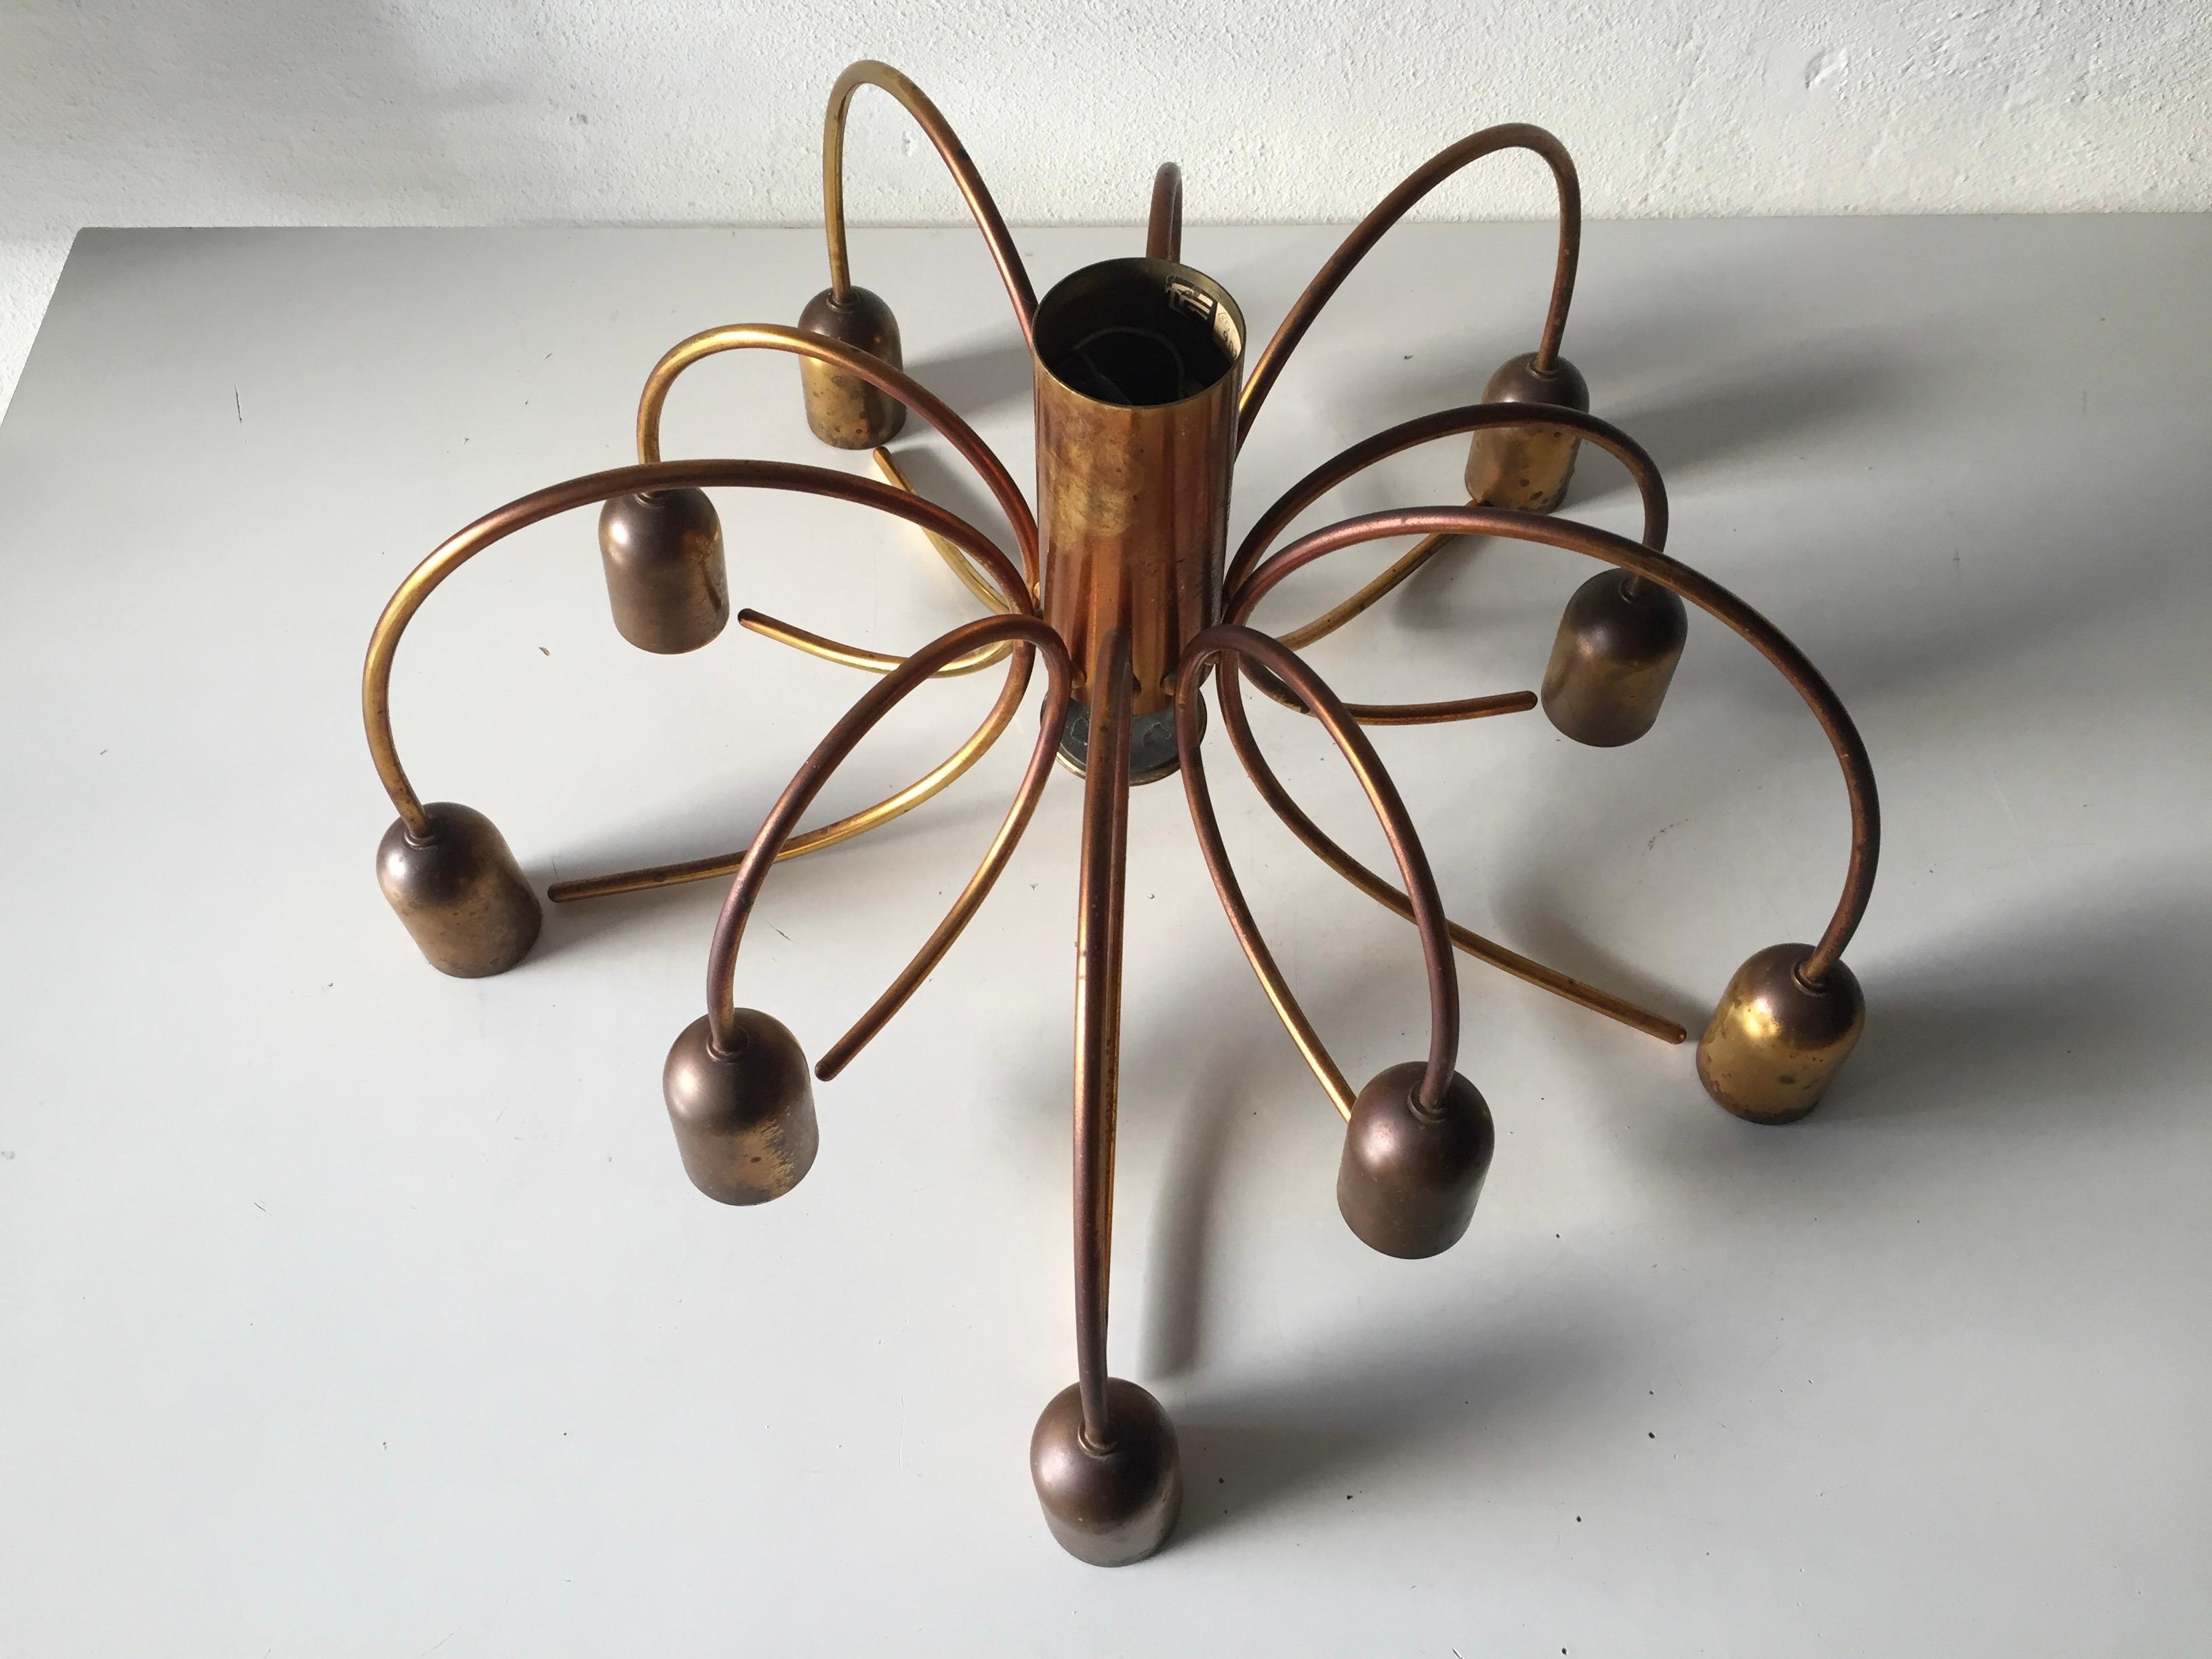 Rare 10 Arc Shaped Arms Full Brass Chandelier by Cosack Leuchten, 1970s Germany For Sale 6